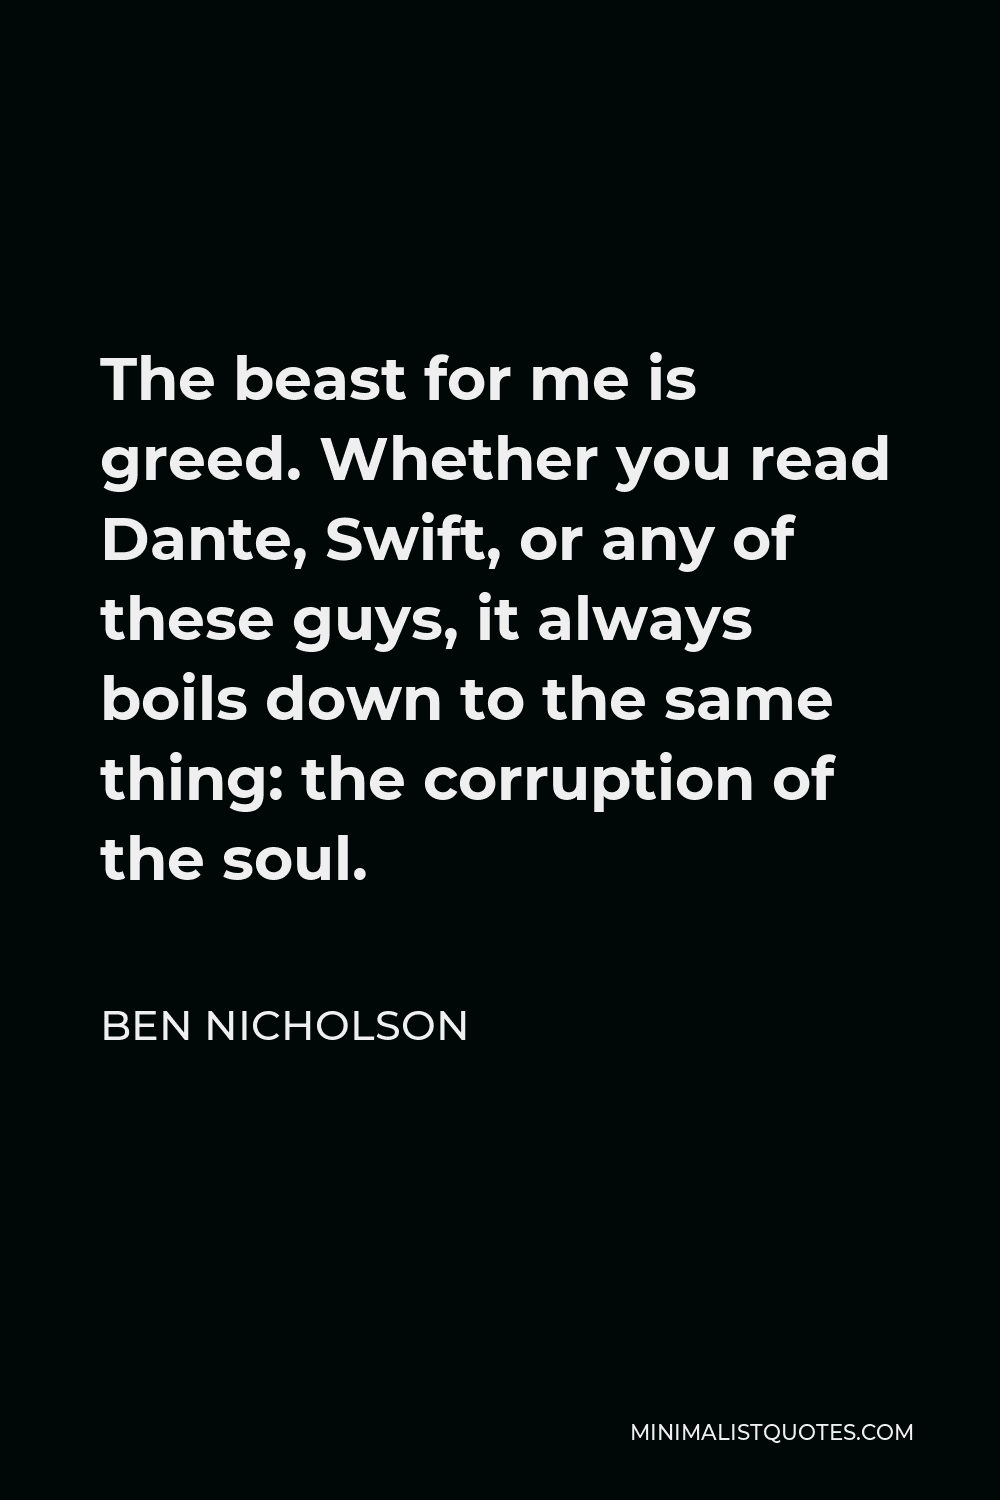 Ben Nicholson Quote - The beast for me is greed. Whether you read Dante, Swift, or any of these guys, it always boils down to the same thing: the corruption of the soul.